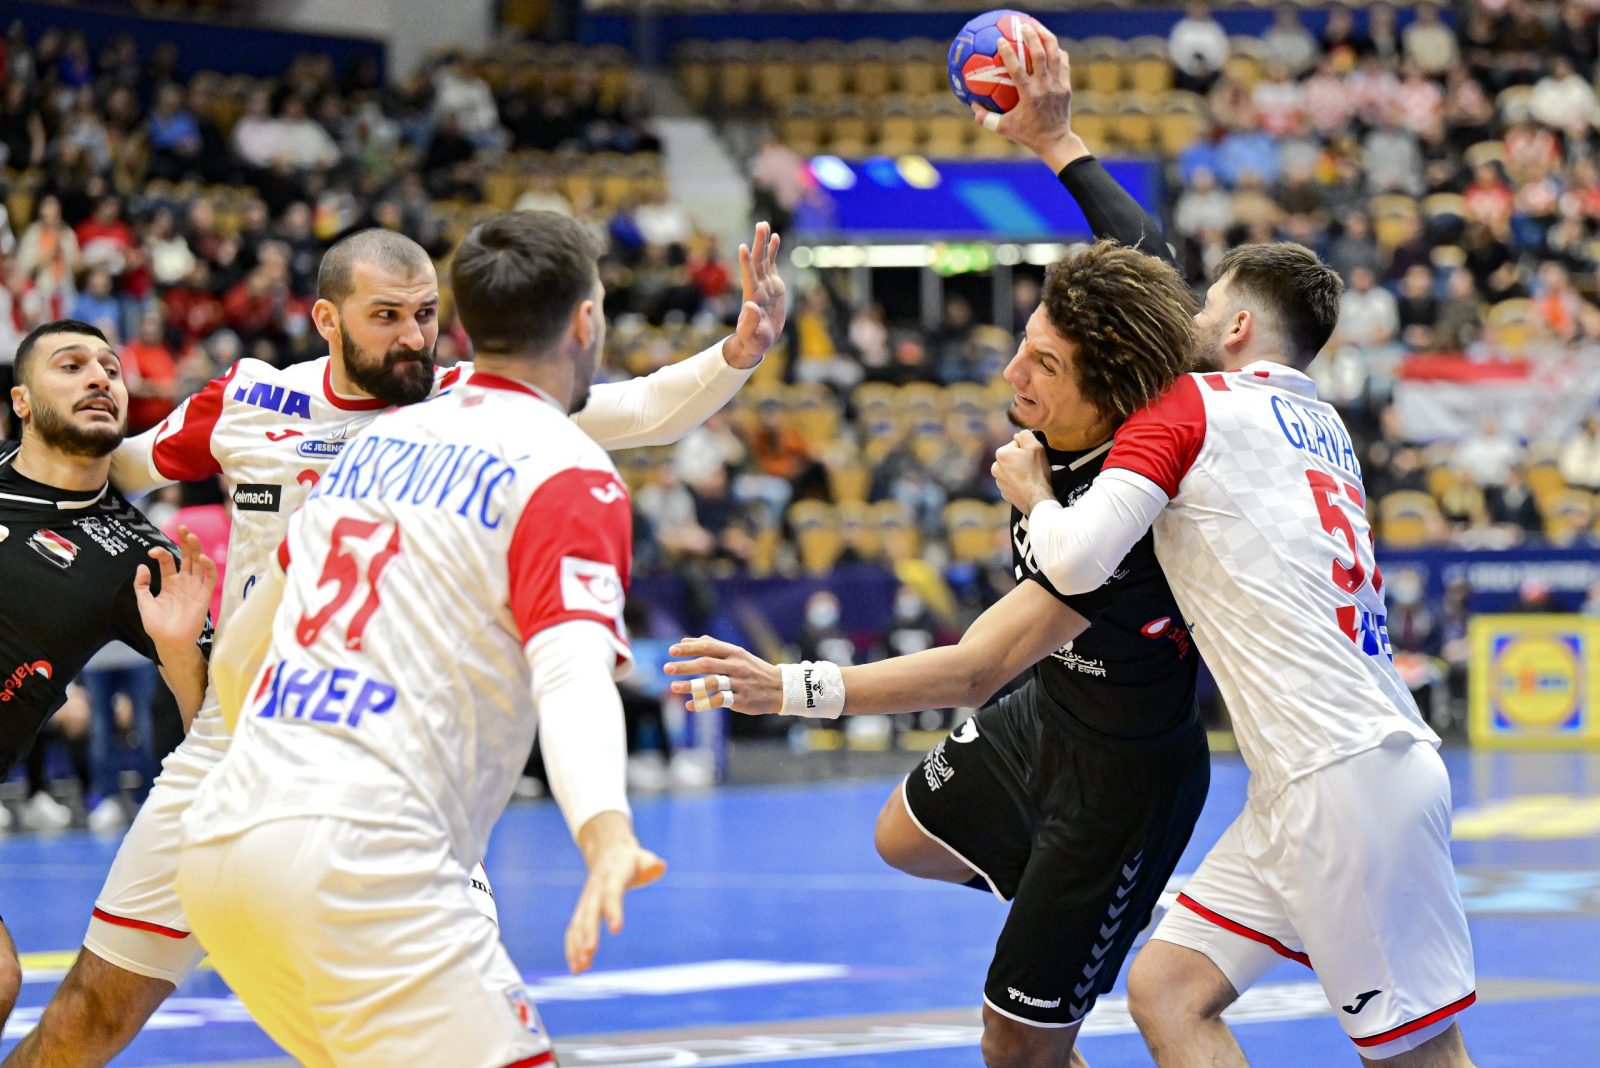 epa10403669 Egypt's Ali Mohamed (C) in action during the IHF Men's World Championship group G handball match between Egypt and Croatia, at Husqvarna Garden in Jonkoping, Sweden, 13 January 2023.  EPA/Mikael Fritzon SWEDEN OUT